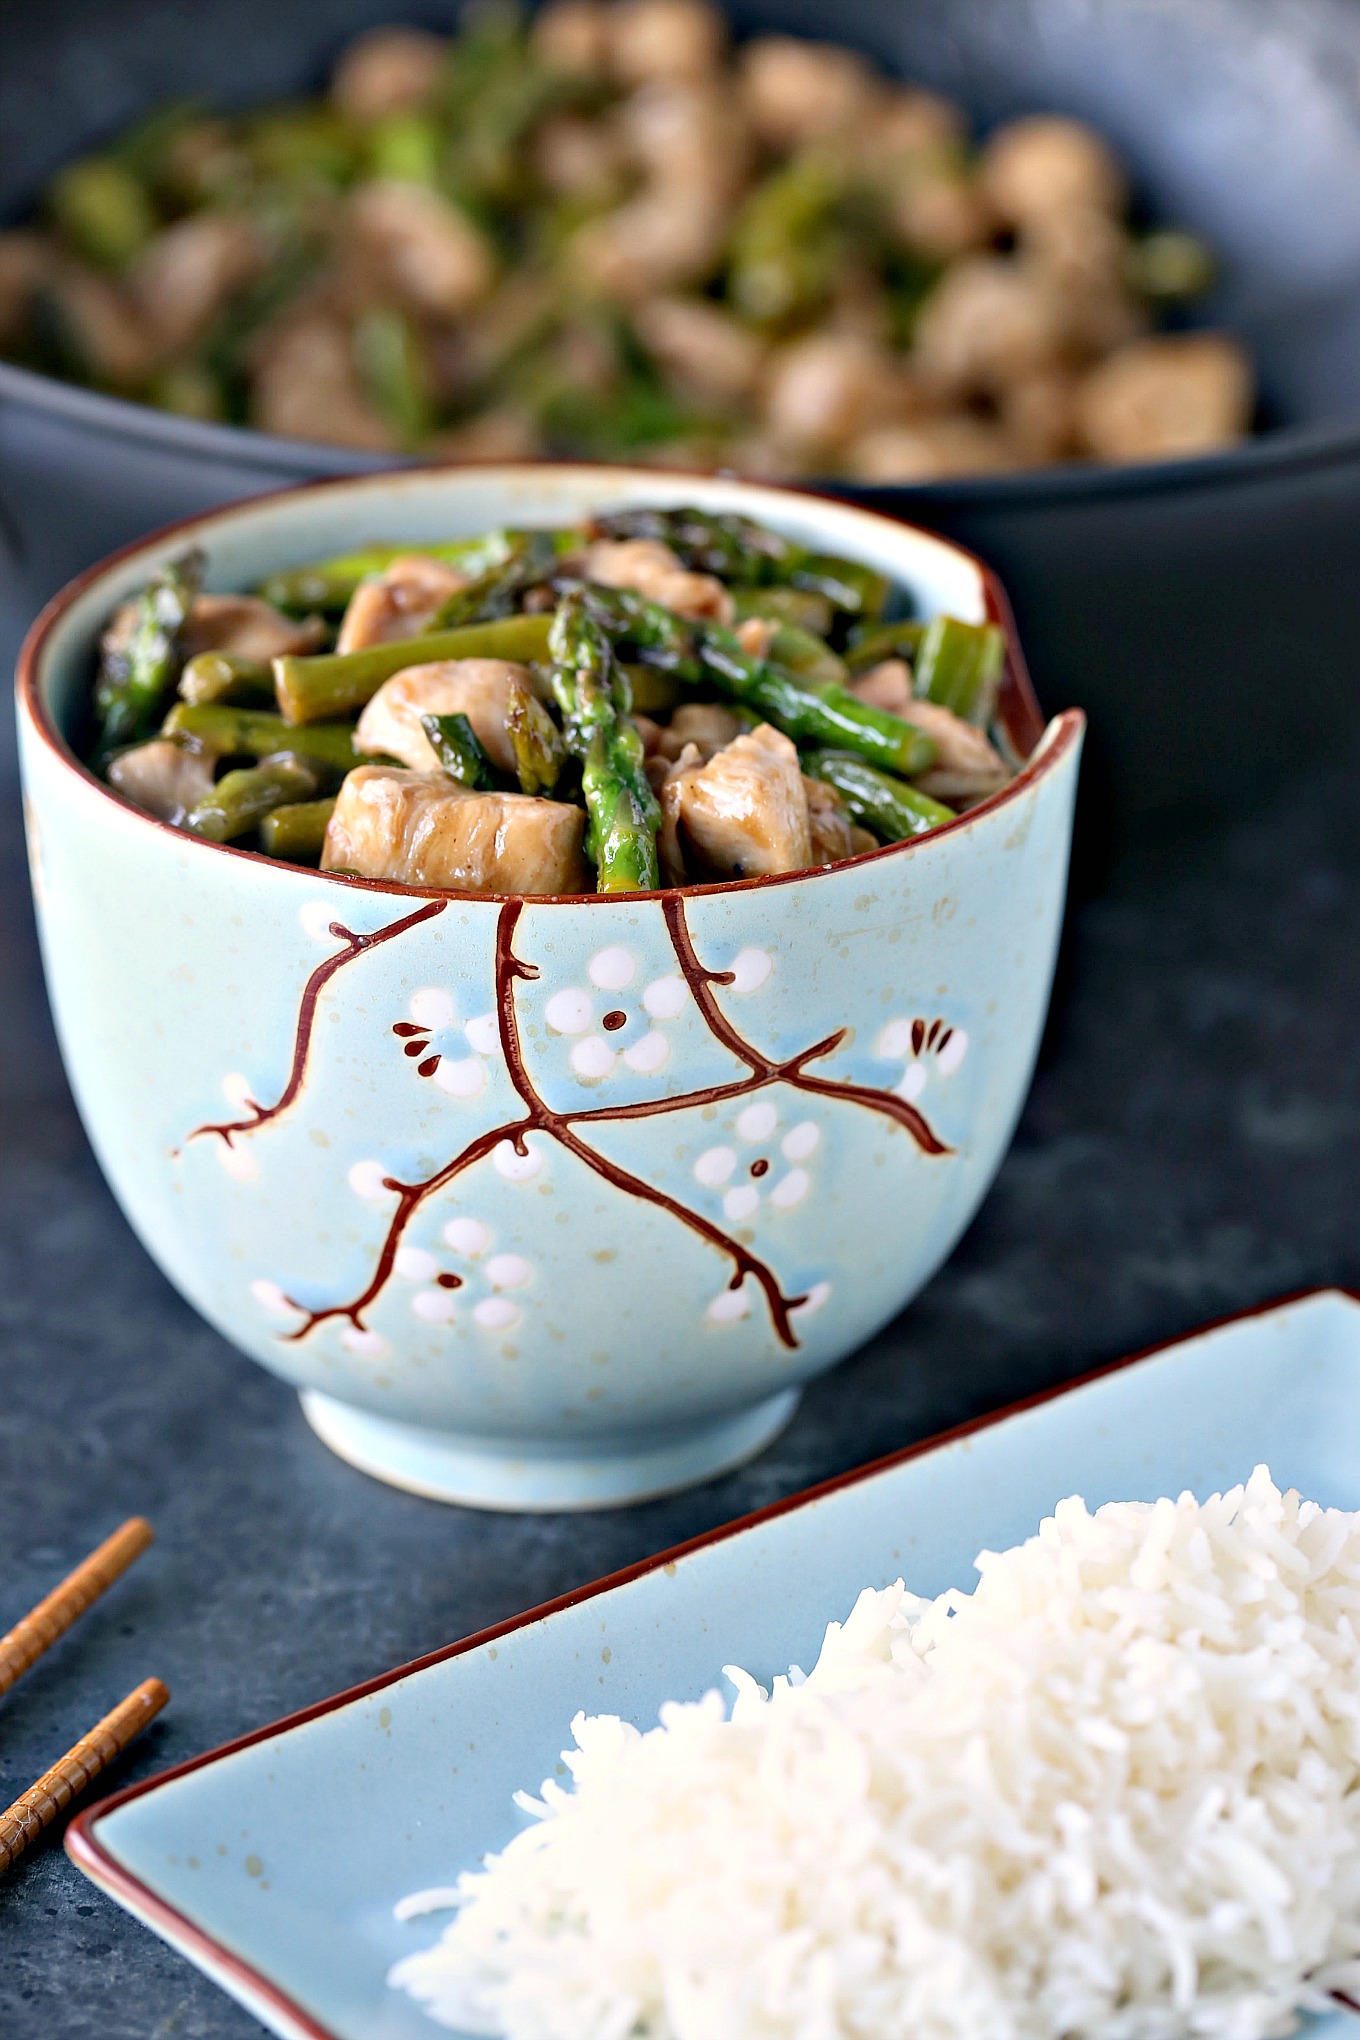 Chicken and Asparagus Stir-Fry with Lemon from cravingsofalunatic.com- This quick and easy recipe for Chicken and Asparagus Stir-Fry with Lemon is a flavour explosion. Simple ingredients cooked in one pan. No muss, no fuss.